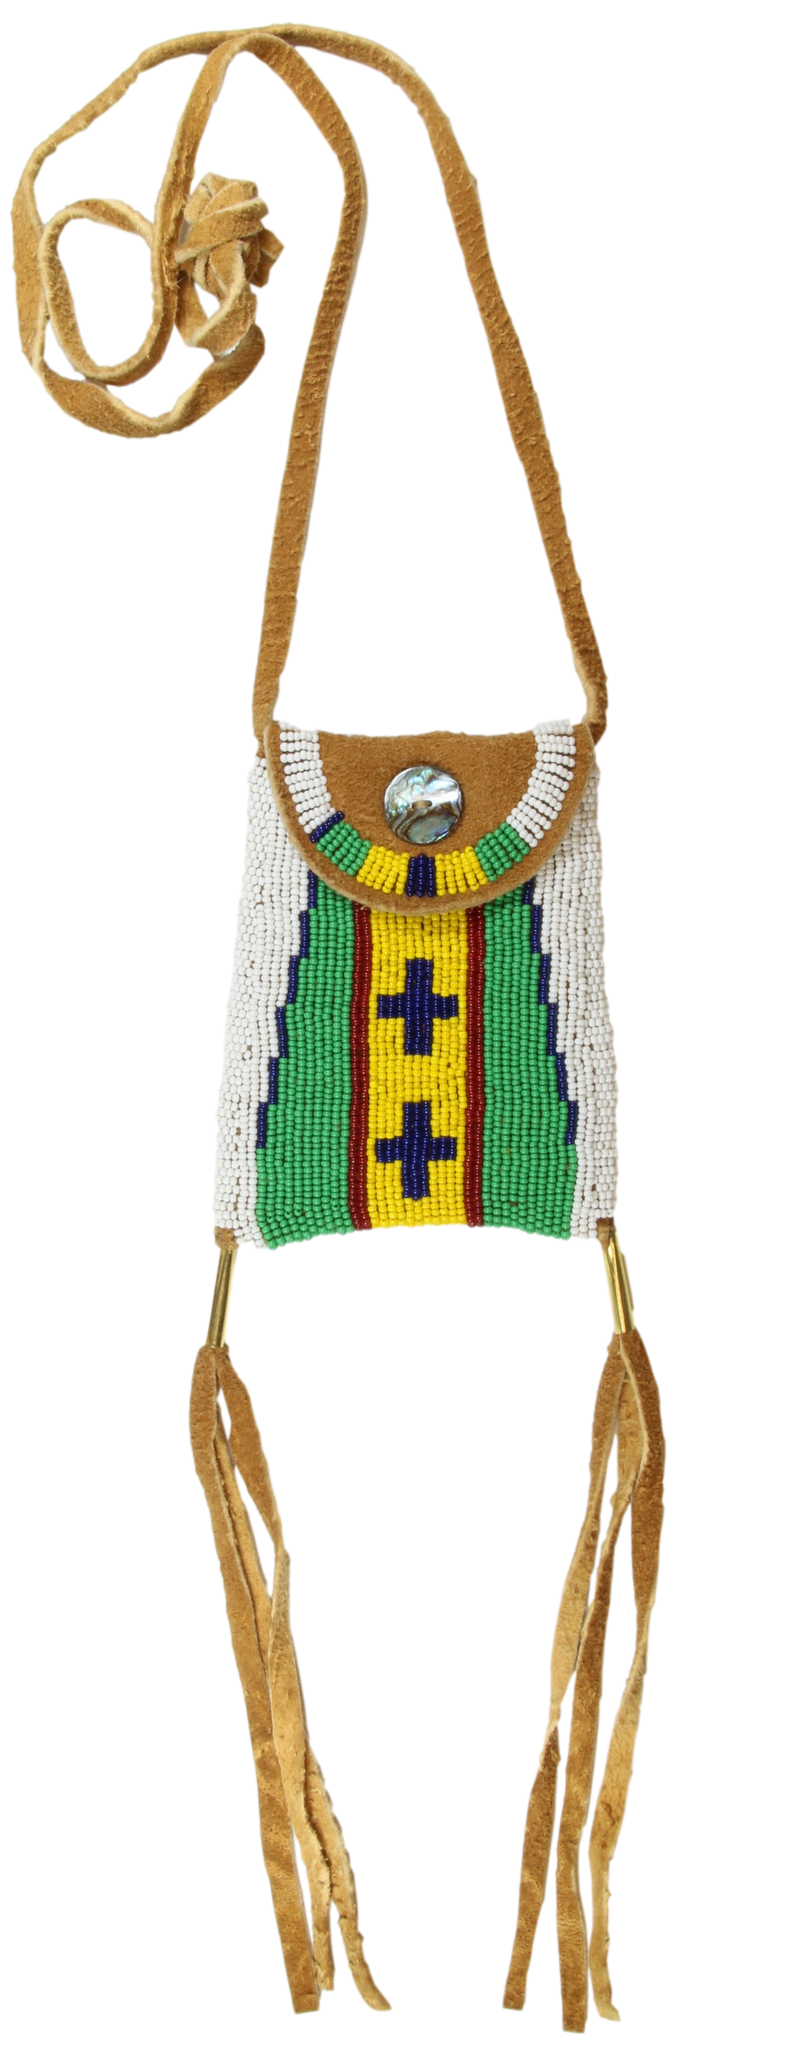 Beaded Plains Indian Medicine Bag or Neck Pouch